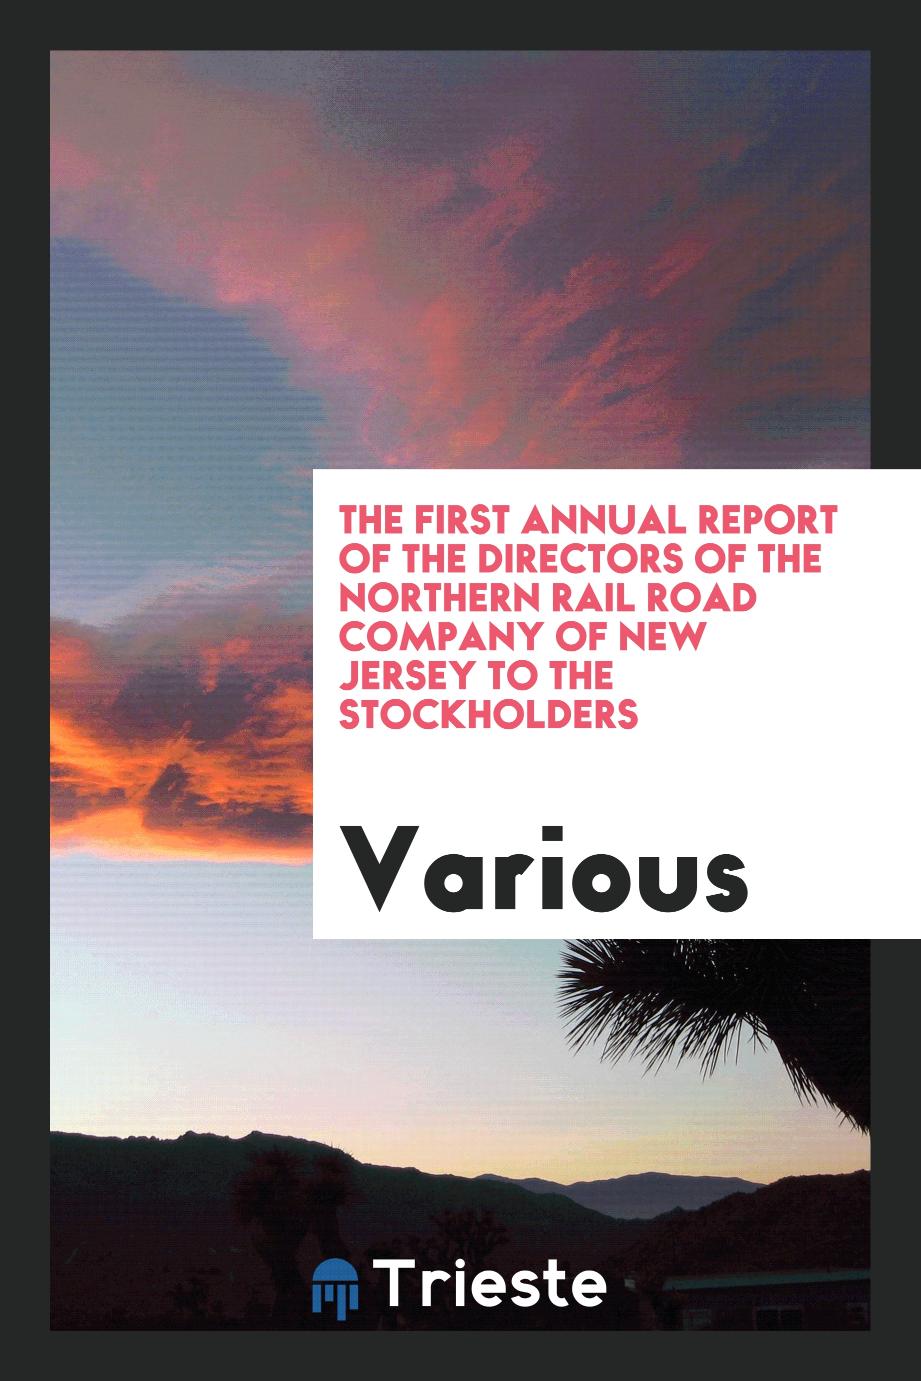 The first annual report of the directors of the Northern Rail Road Company of New Jersey to the stockholders